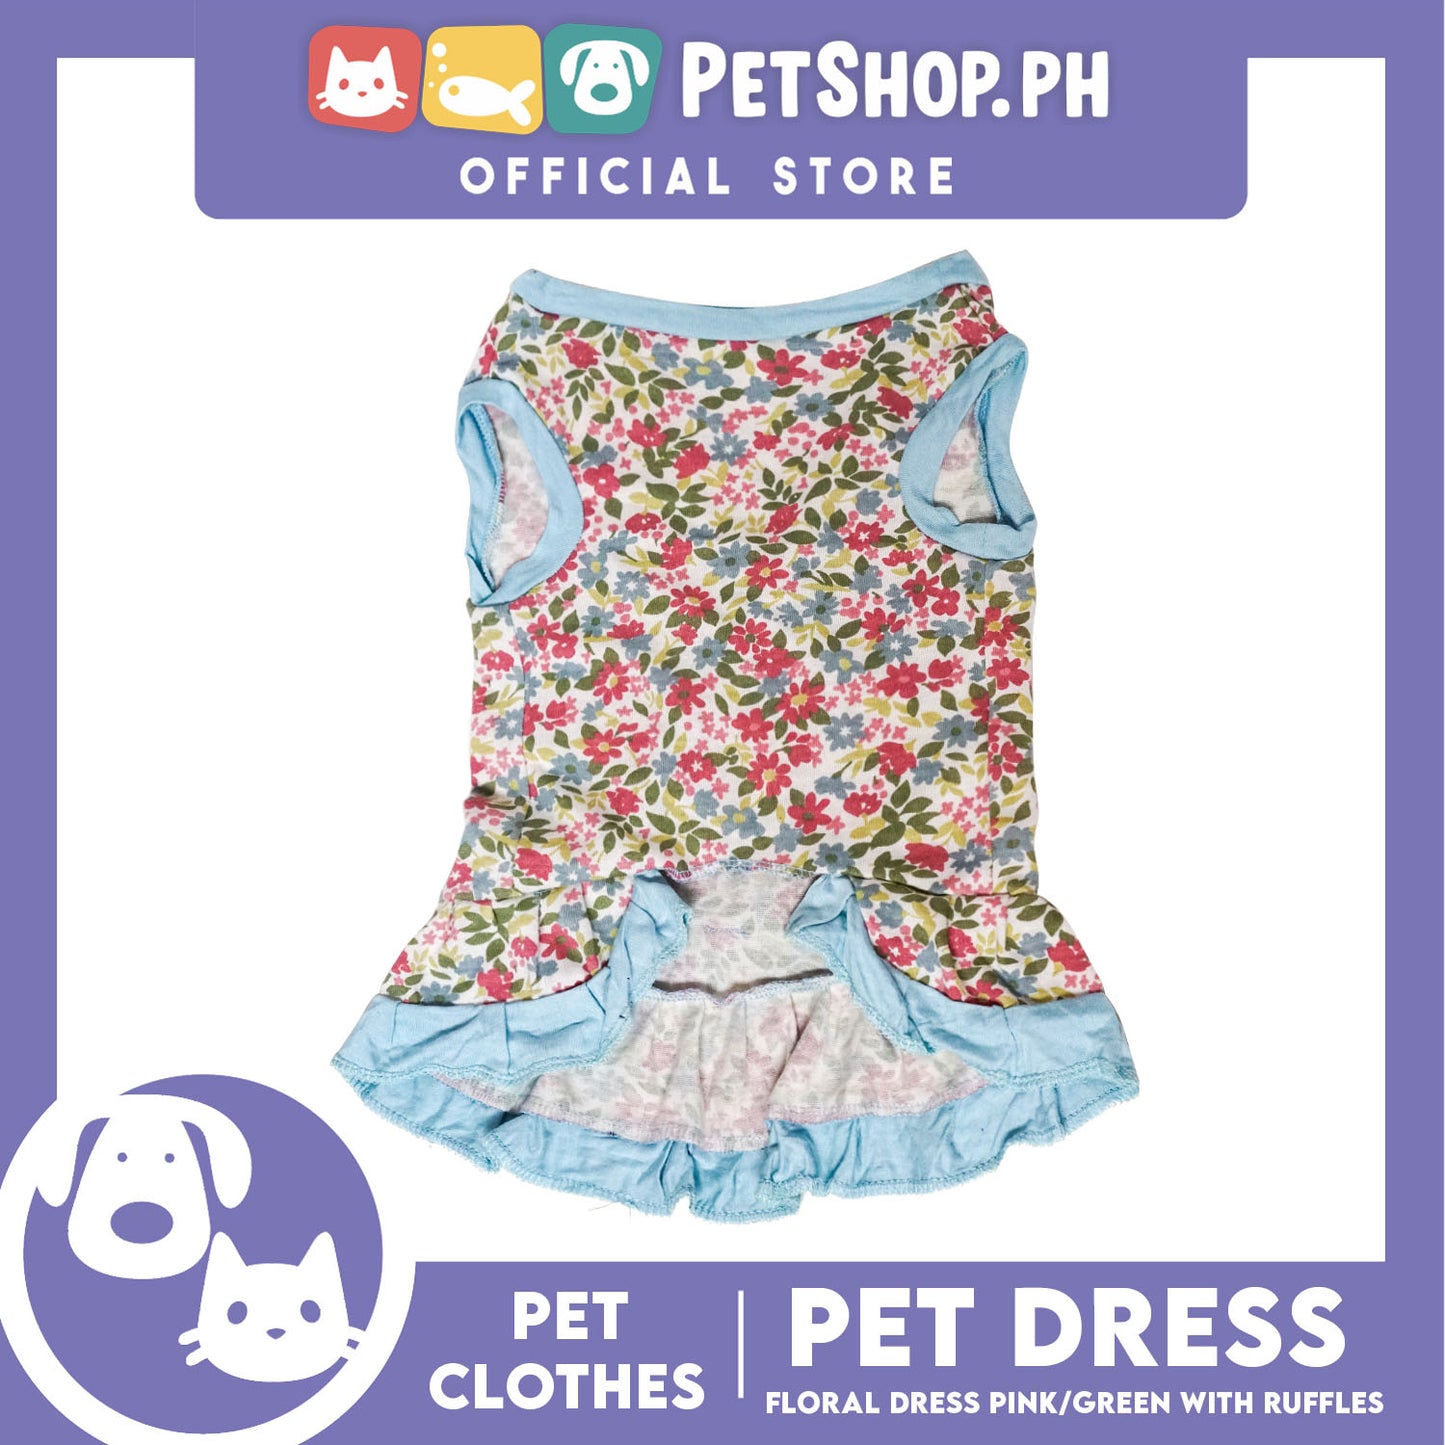 Floral Dress Pink / Green with Ruffles (Extra Large) for Puppy, Small Dogs and Cats